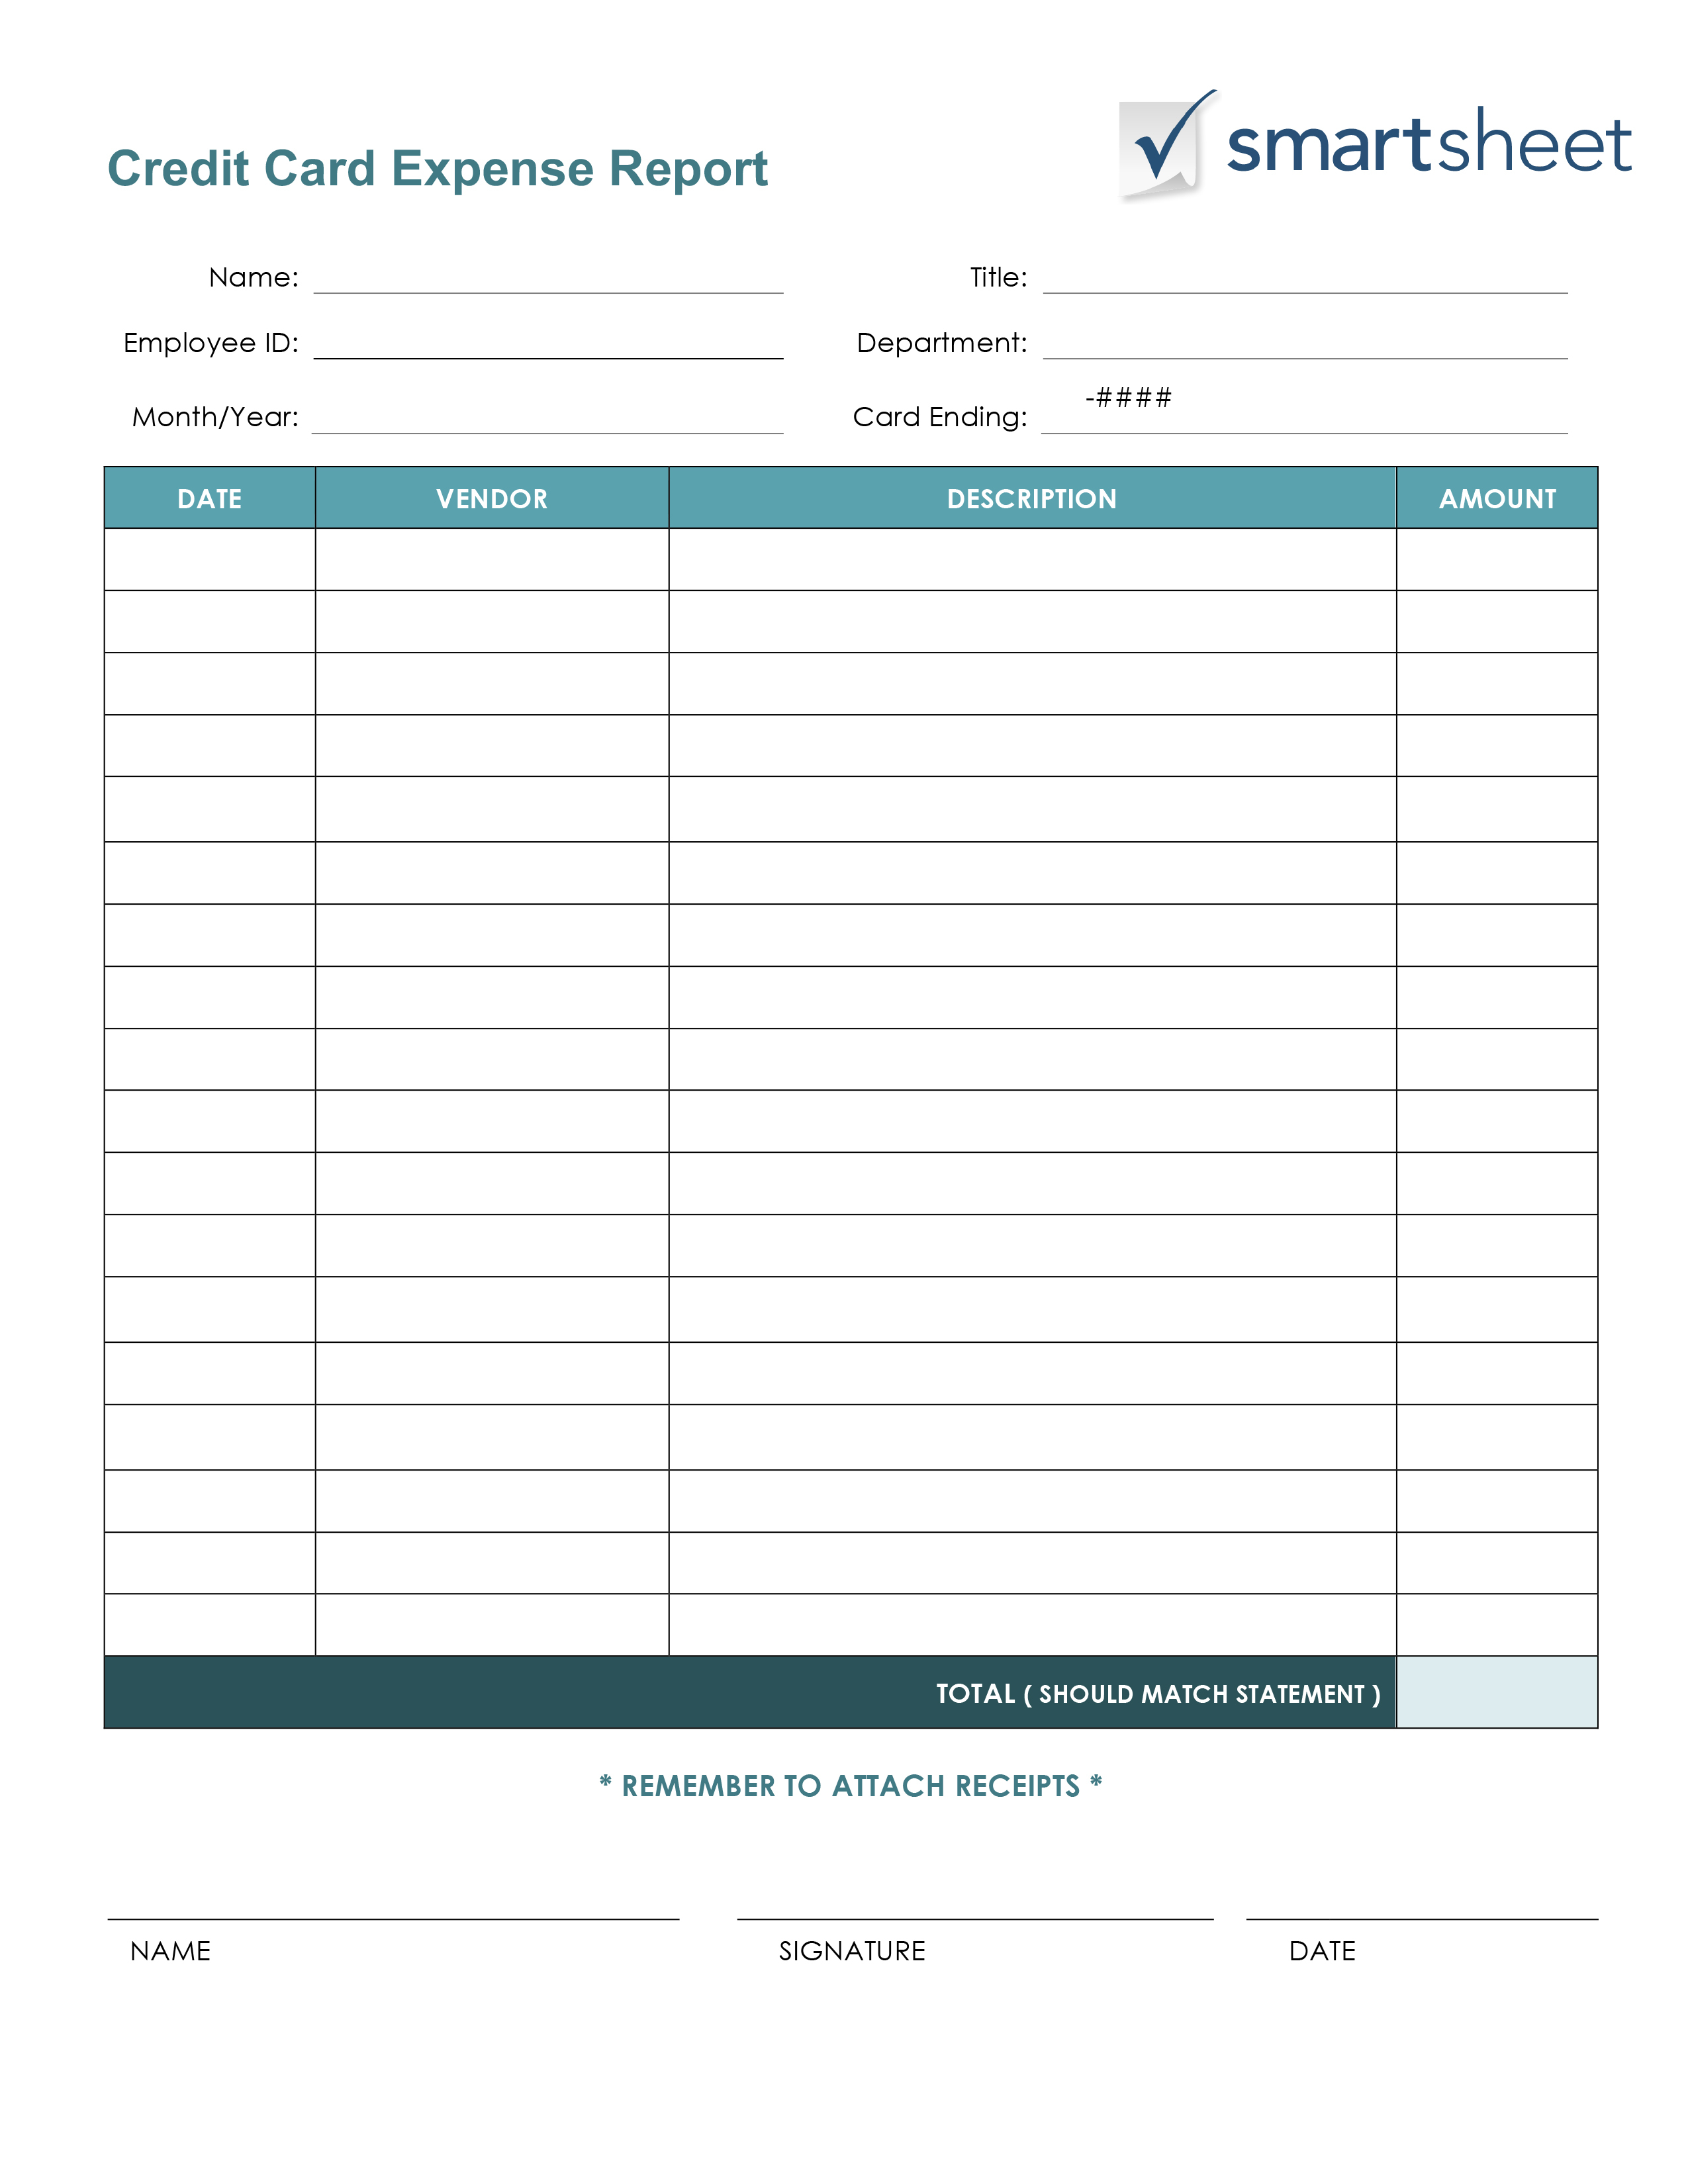 Free Expense Report Templates Smartsheet To Business Expenses Claim Form Template